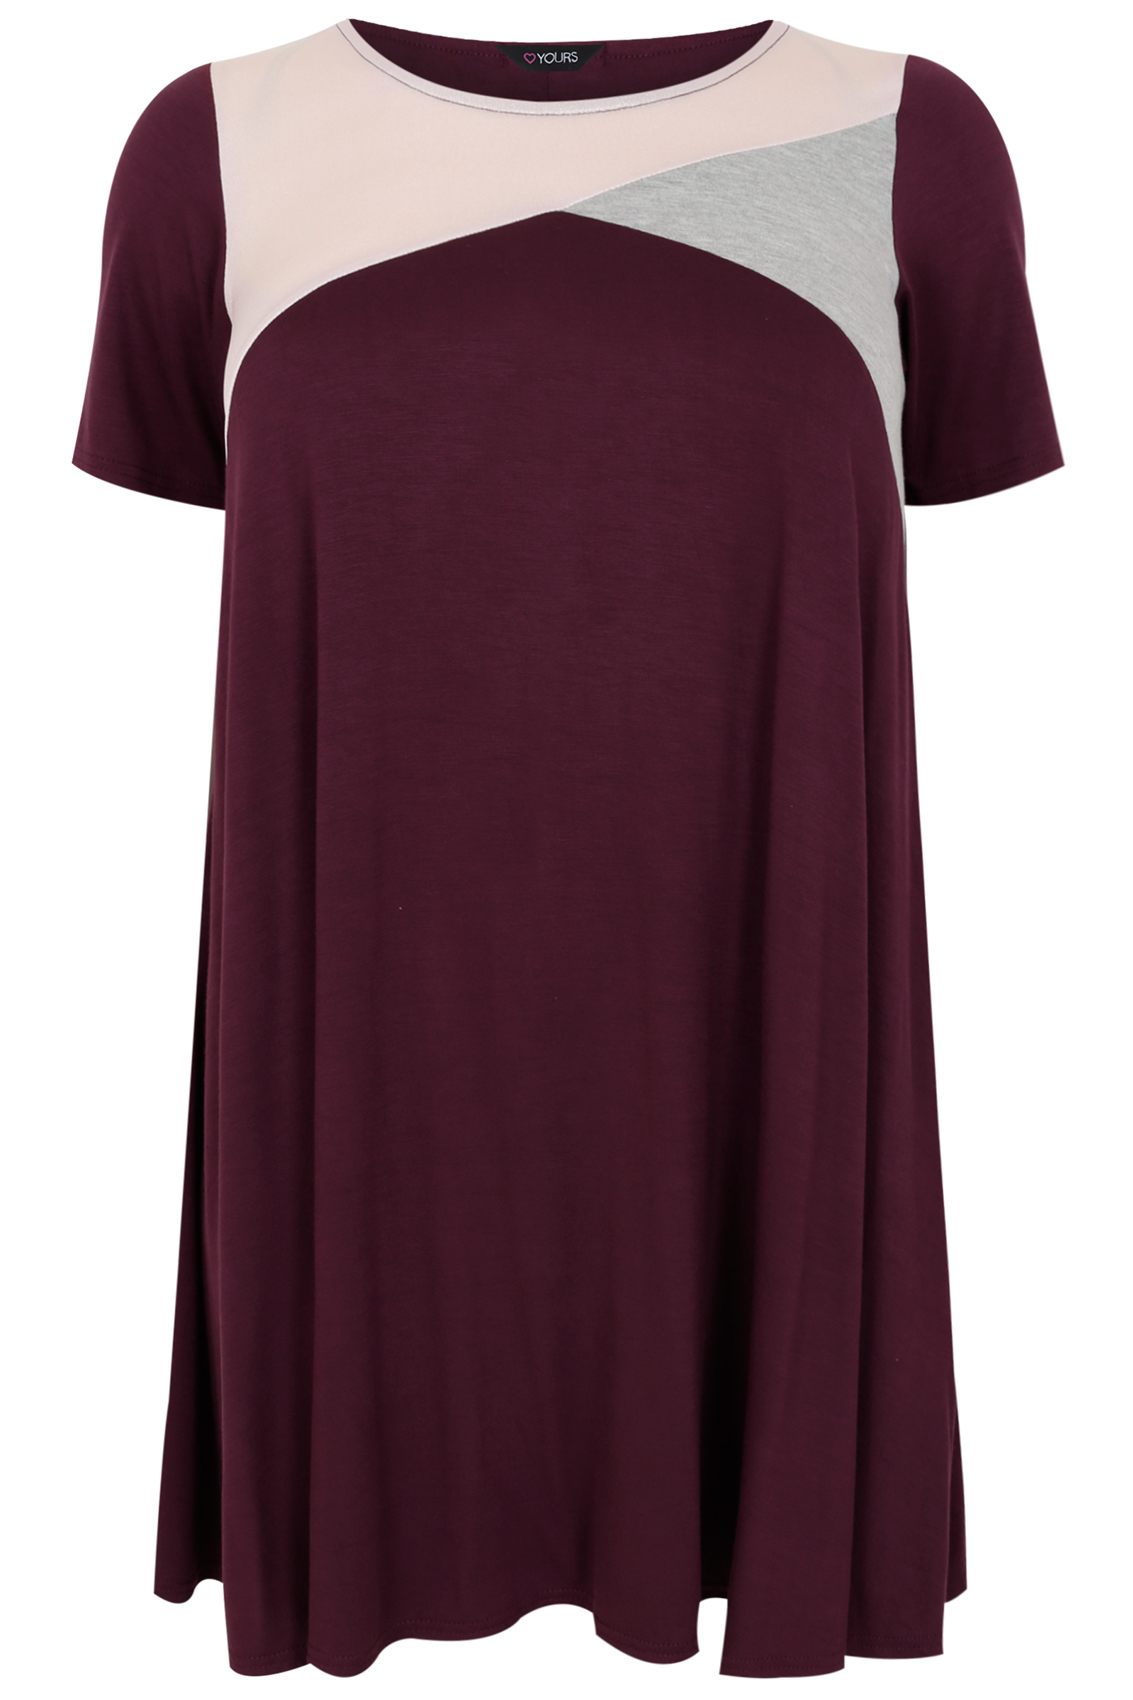 Burgundy, Grey & Pink Shimmer Colour Block Tunic Dress, Plus Size 16 to 36